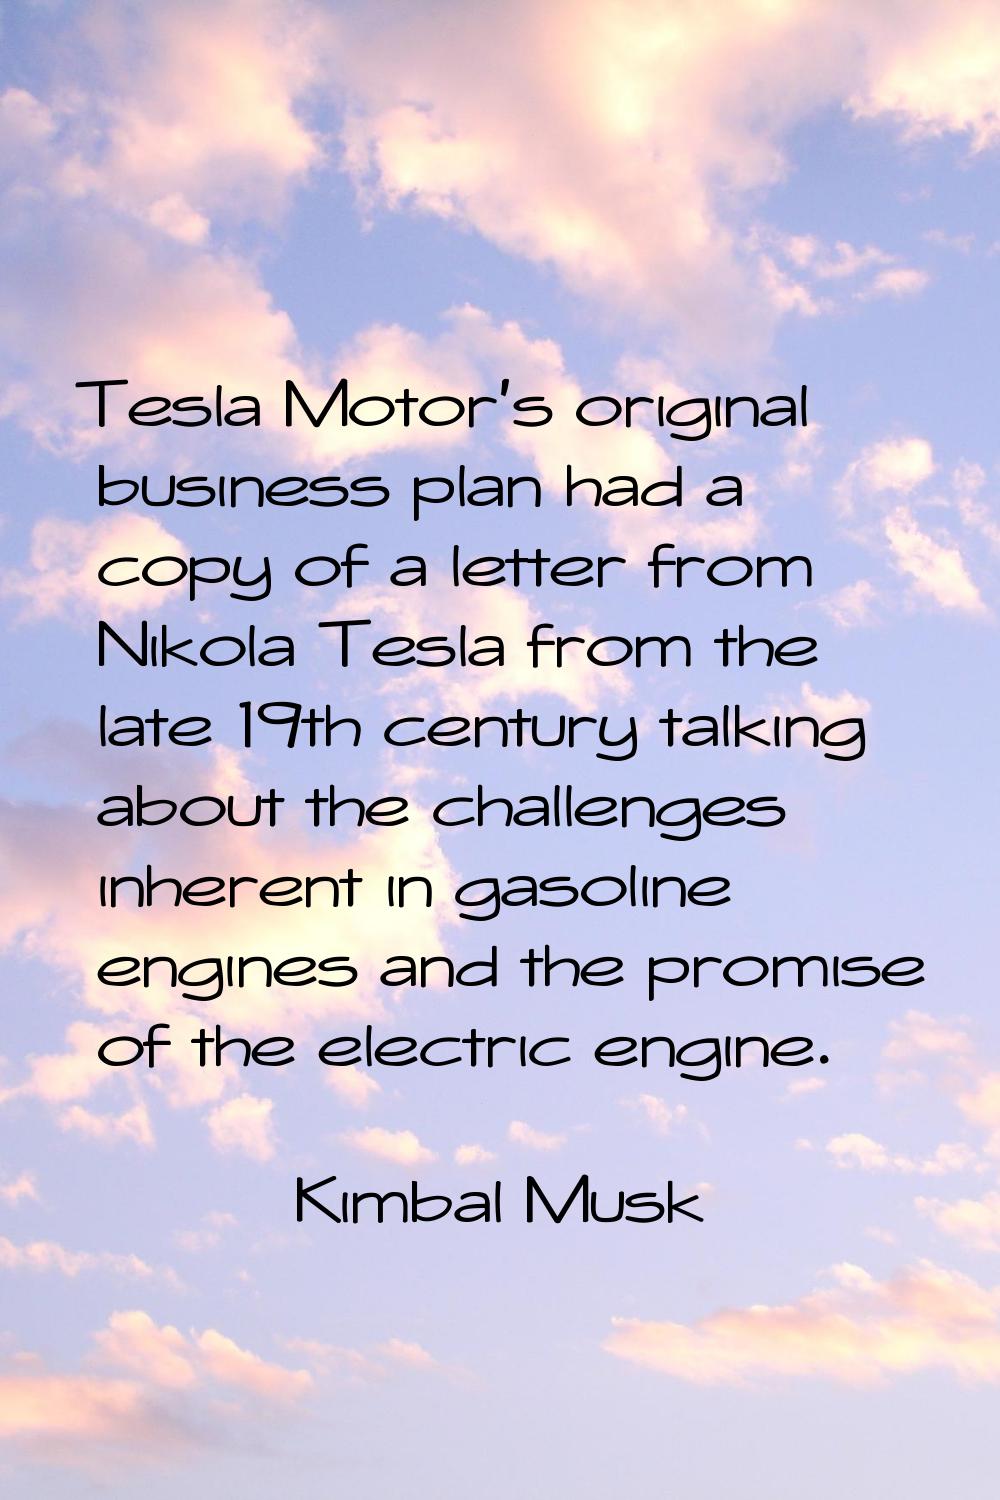 Tesla Motor's original business plan had a copy of a letter from Nikola Tesla from the late 19th ce